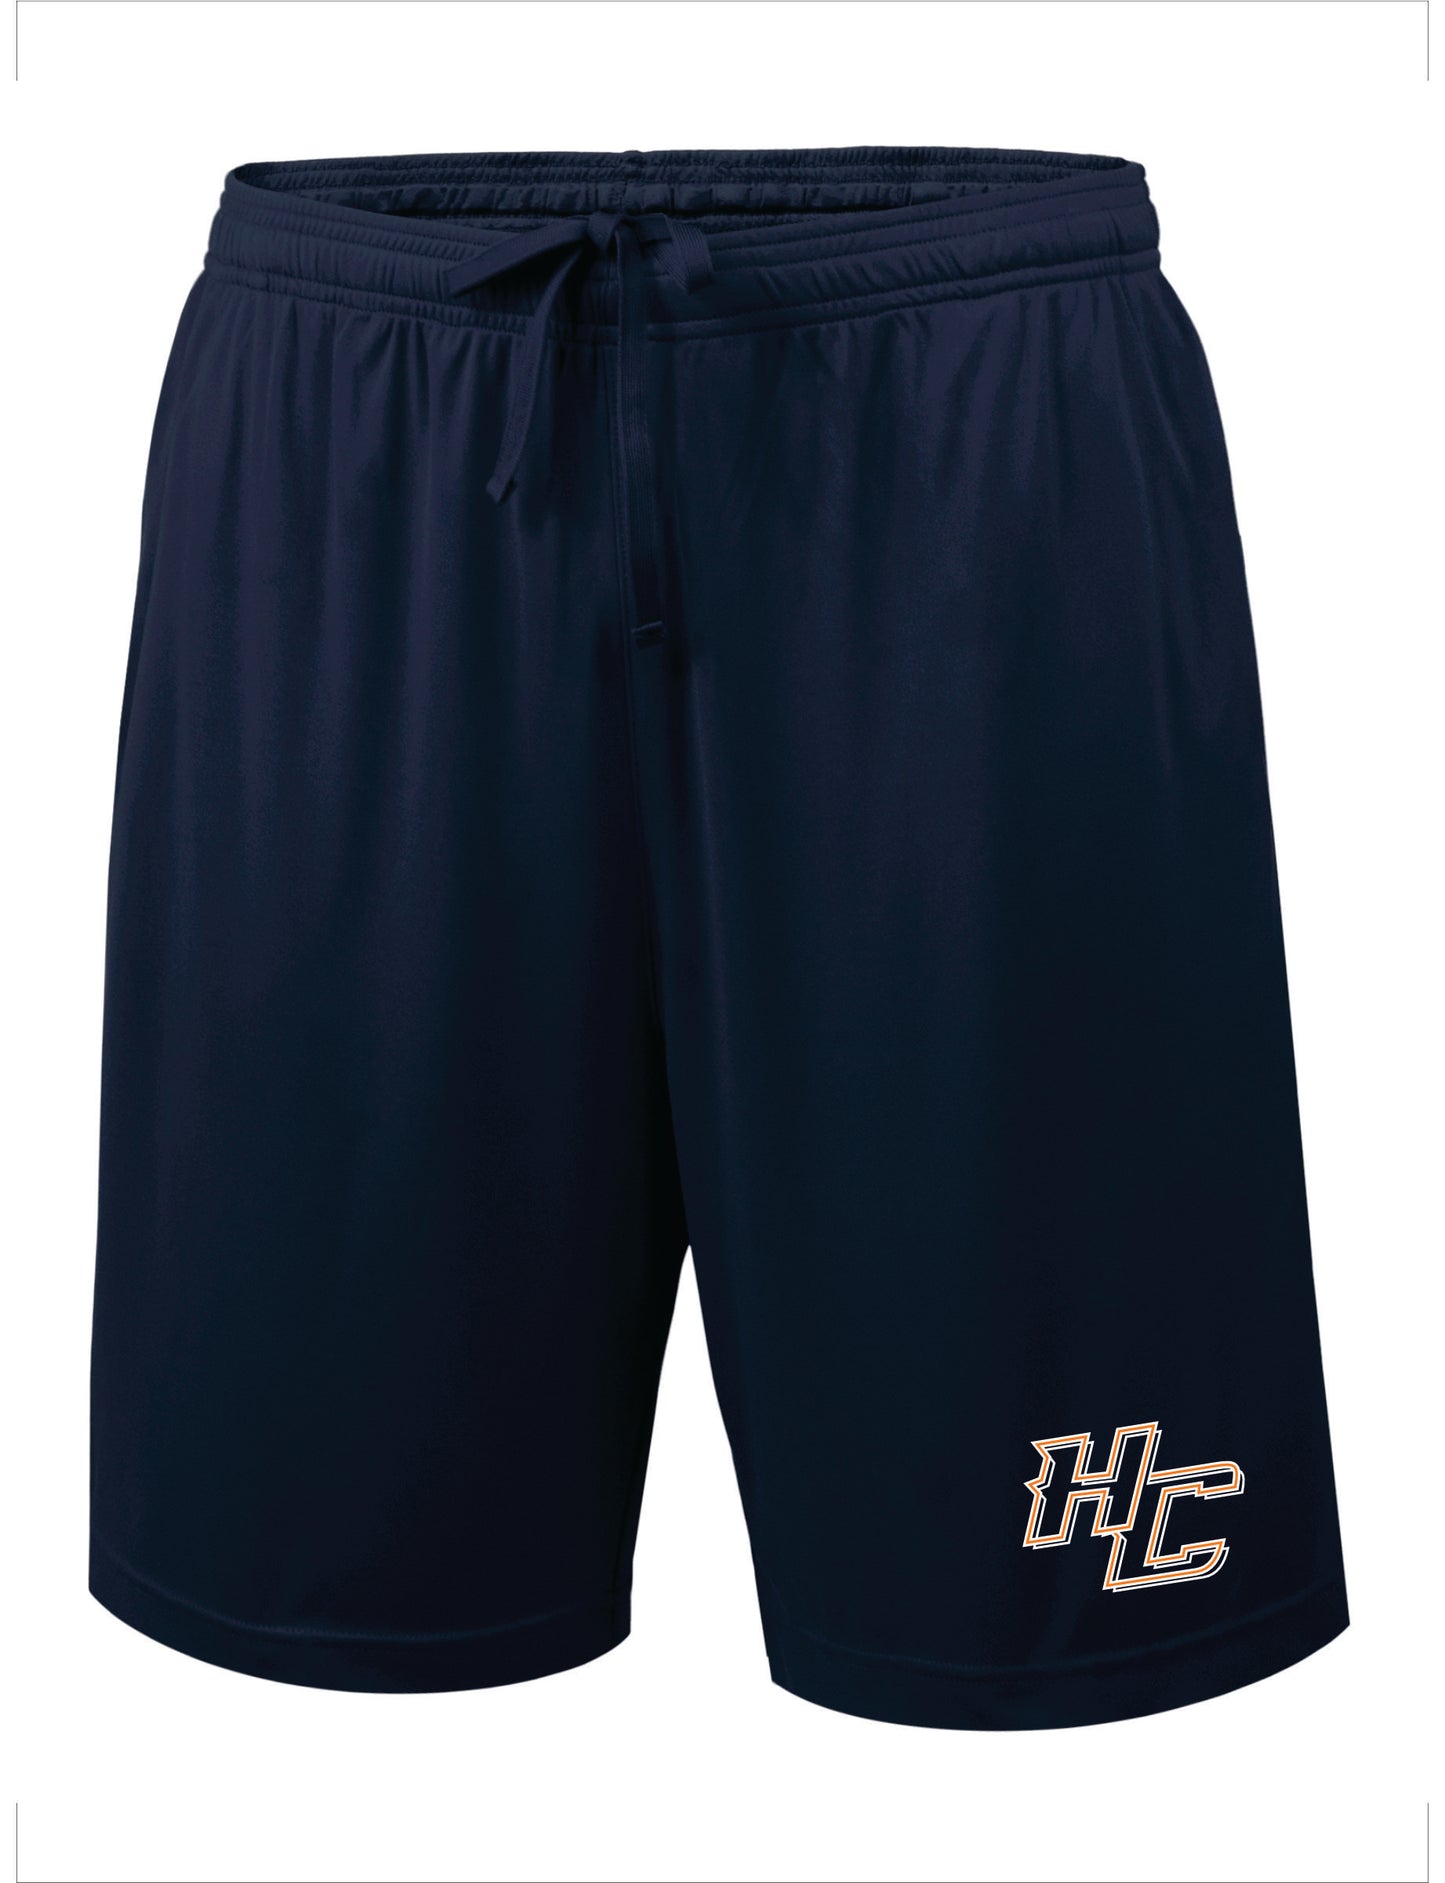 Houston Colts "HC" Embroidered Mesh Shorts